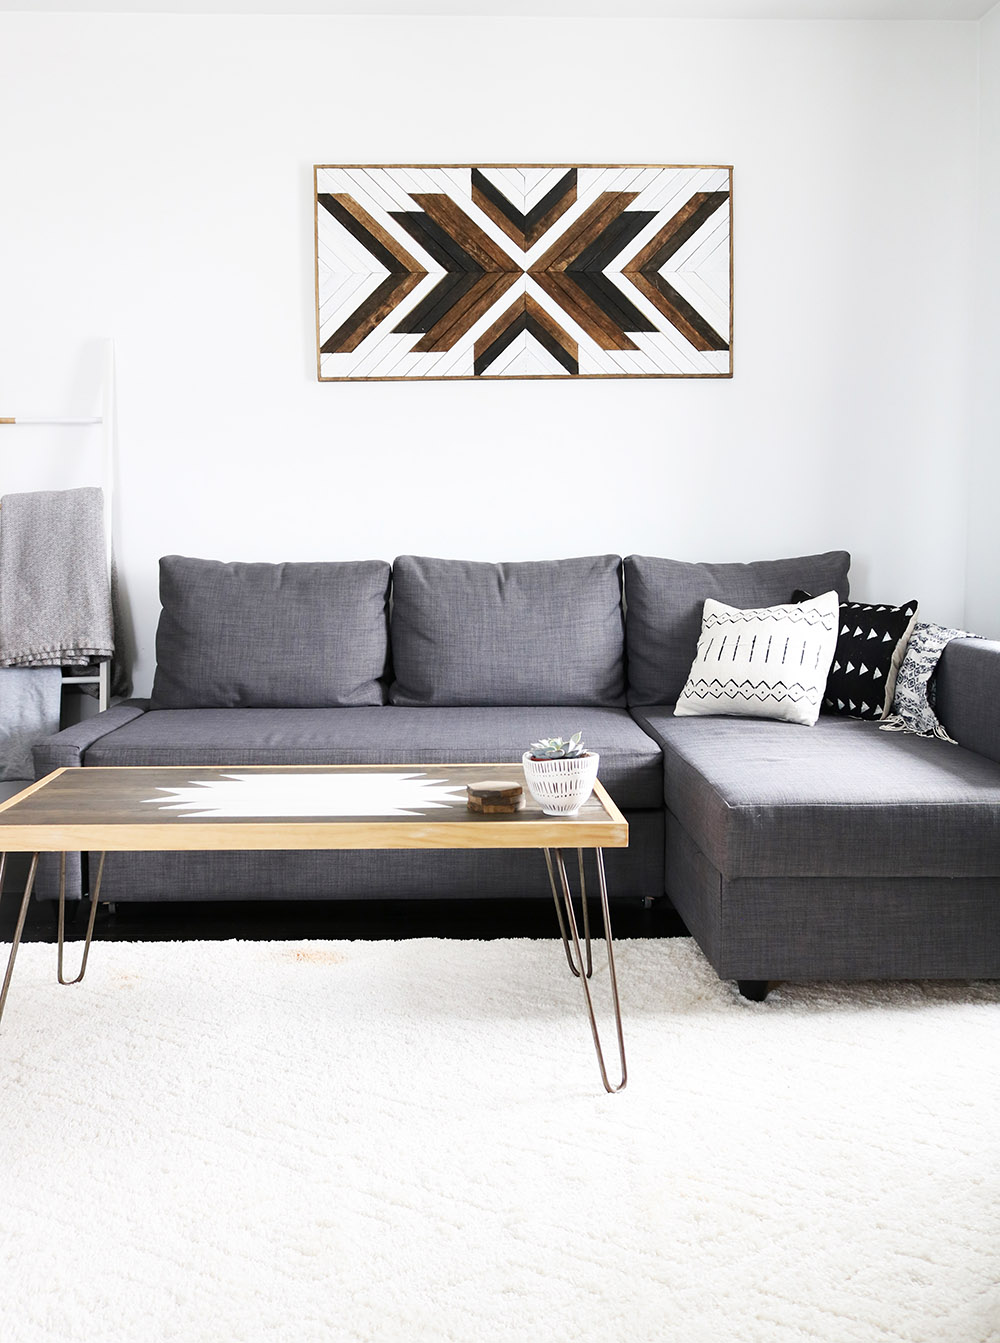 A room with a gray sectional sofa and a clean white rug.